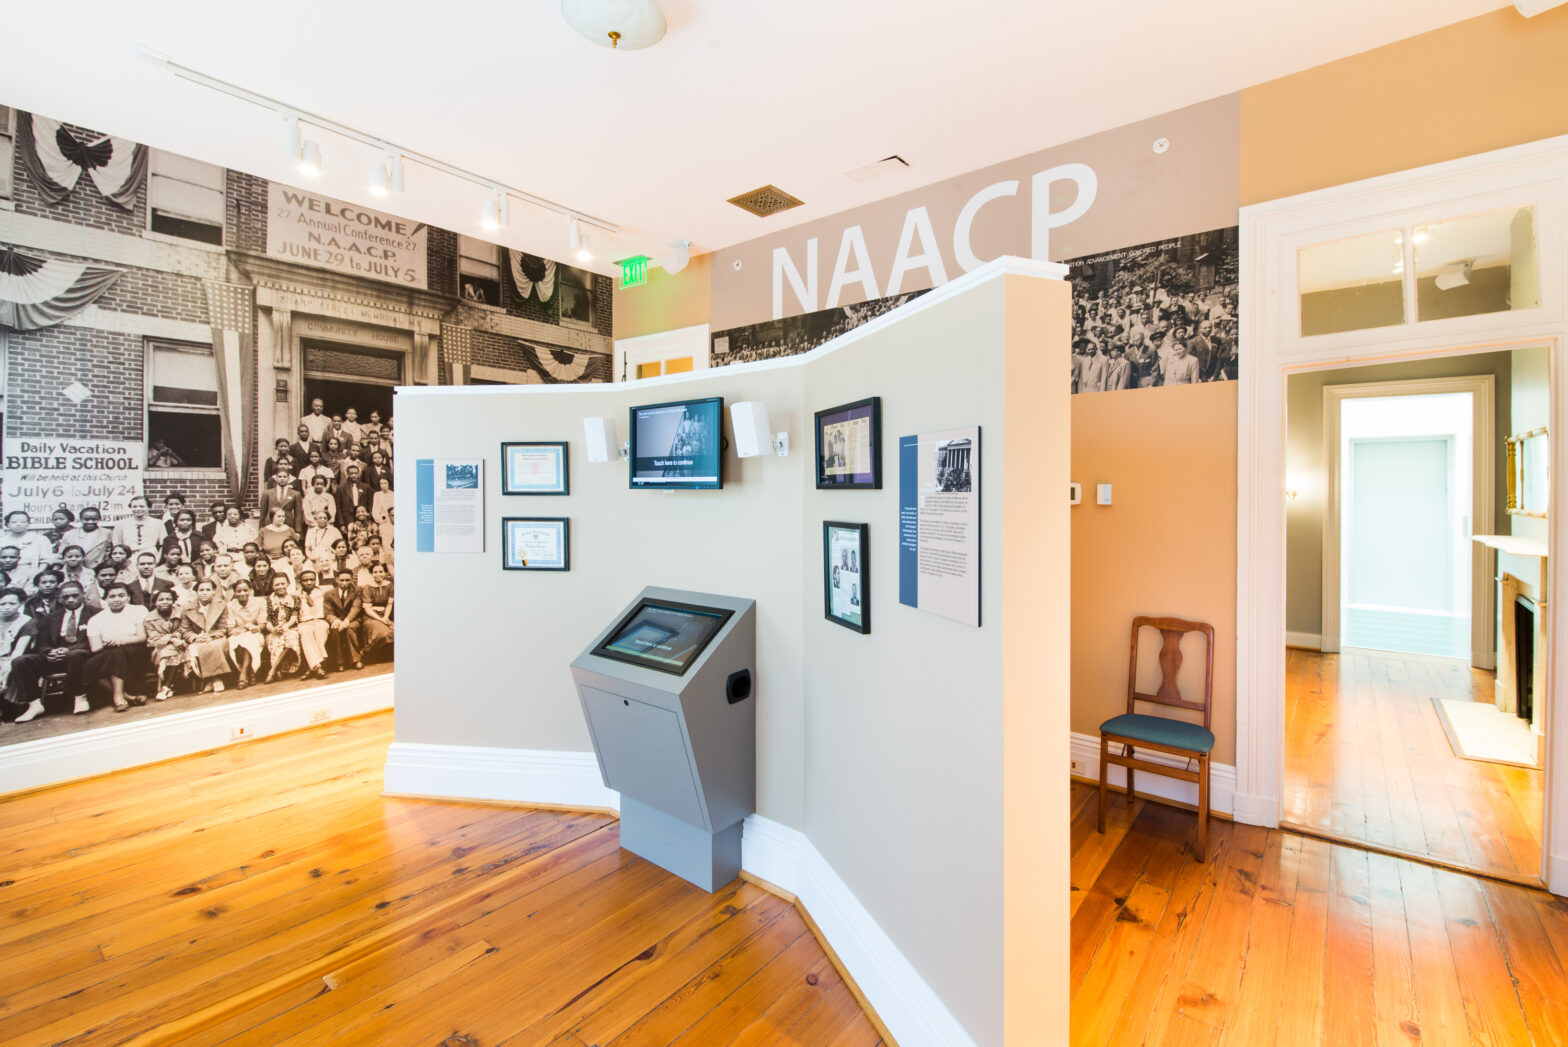 The Lillie Carroll Jackson Civil Rights Museum is a Must See For The